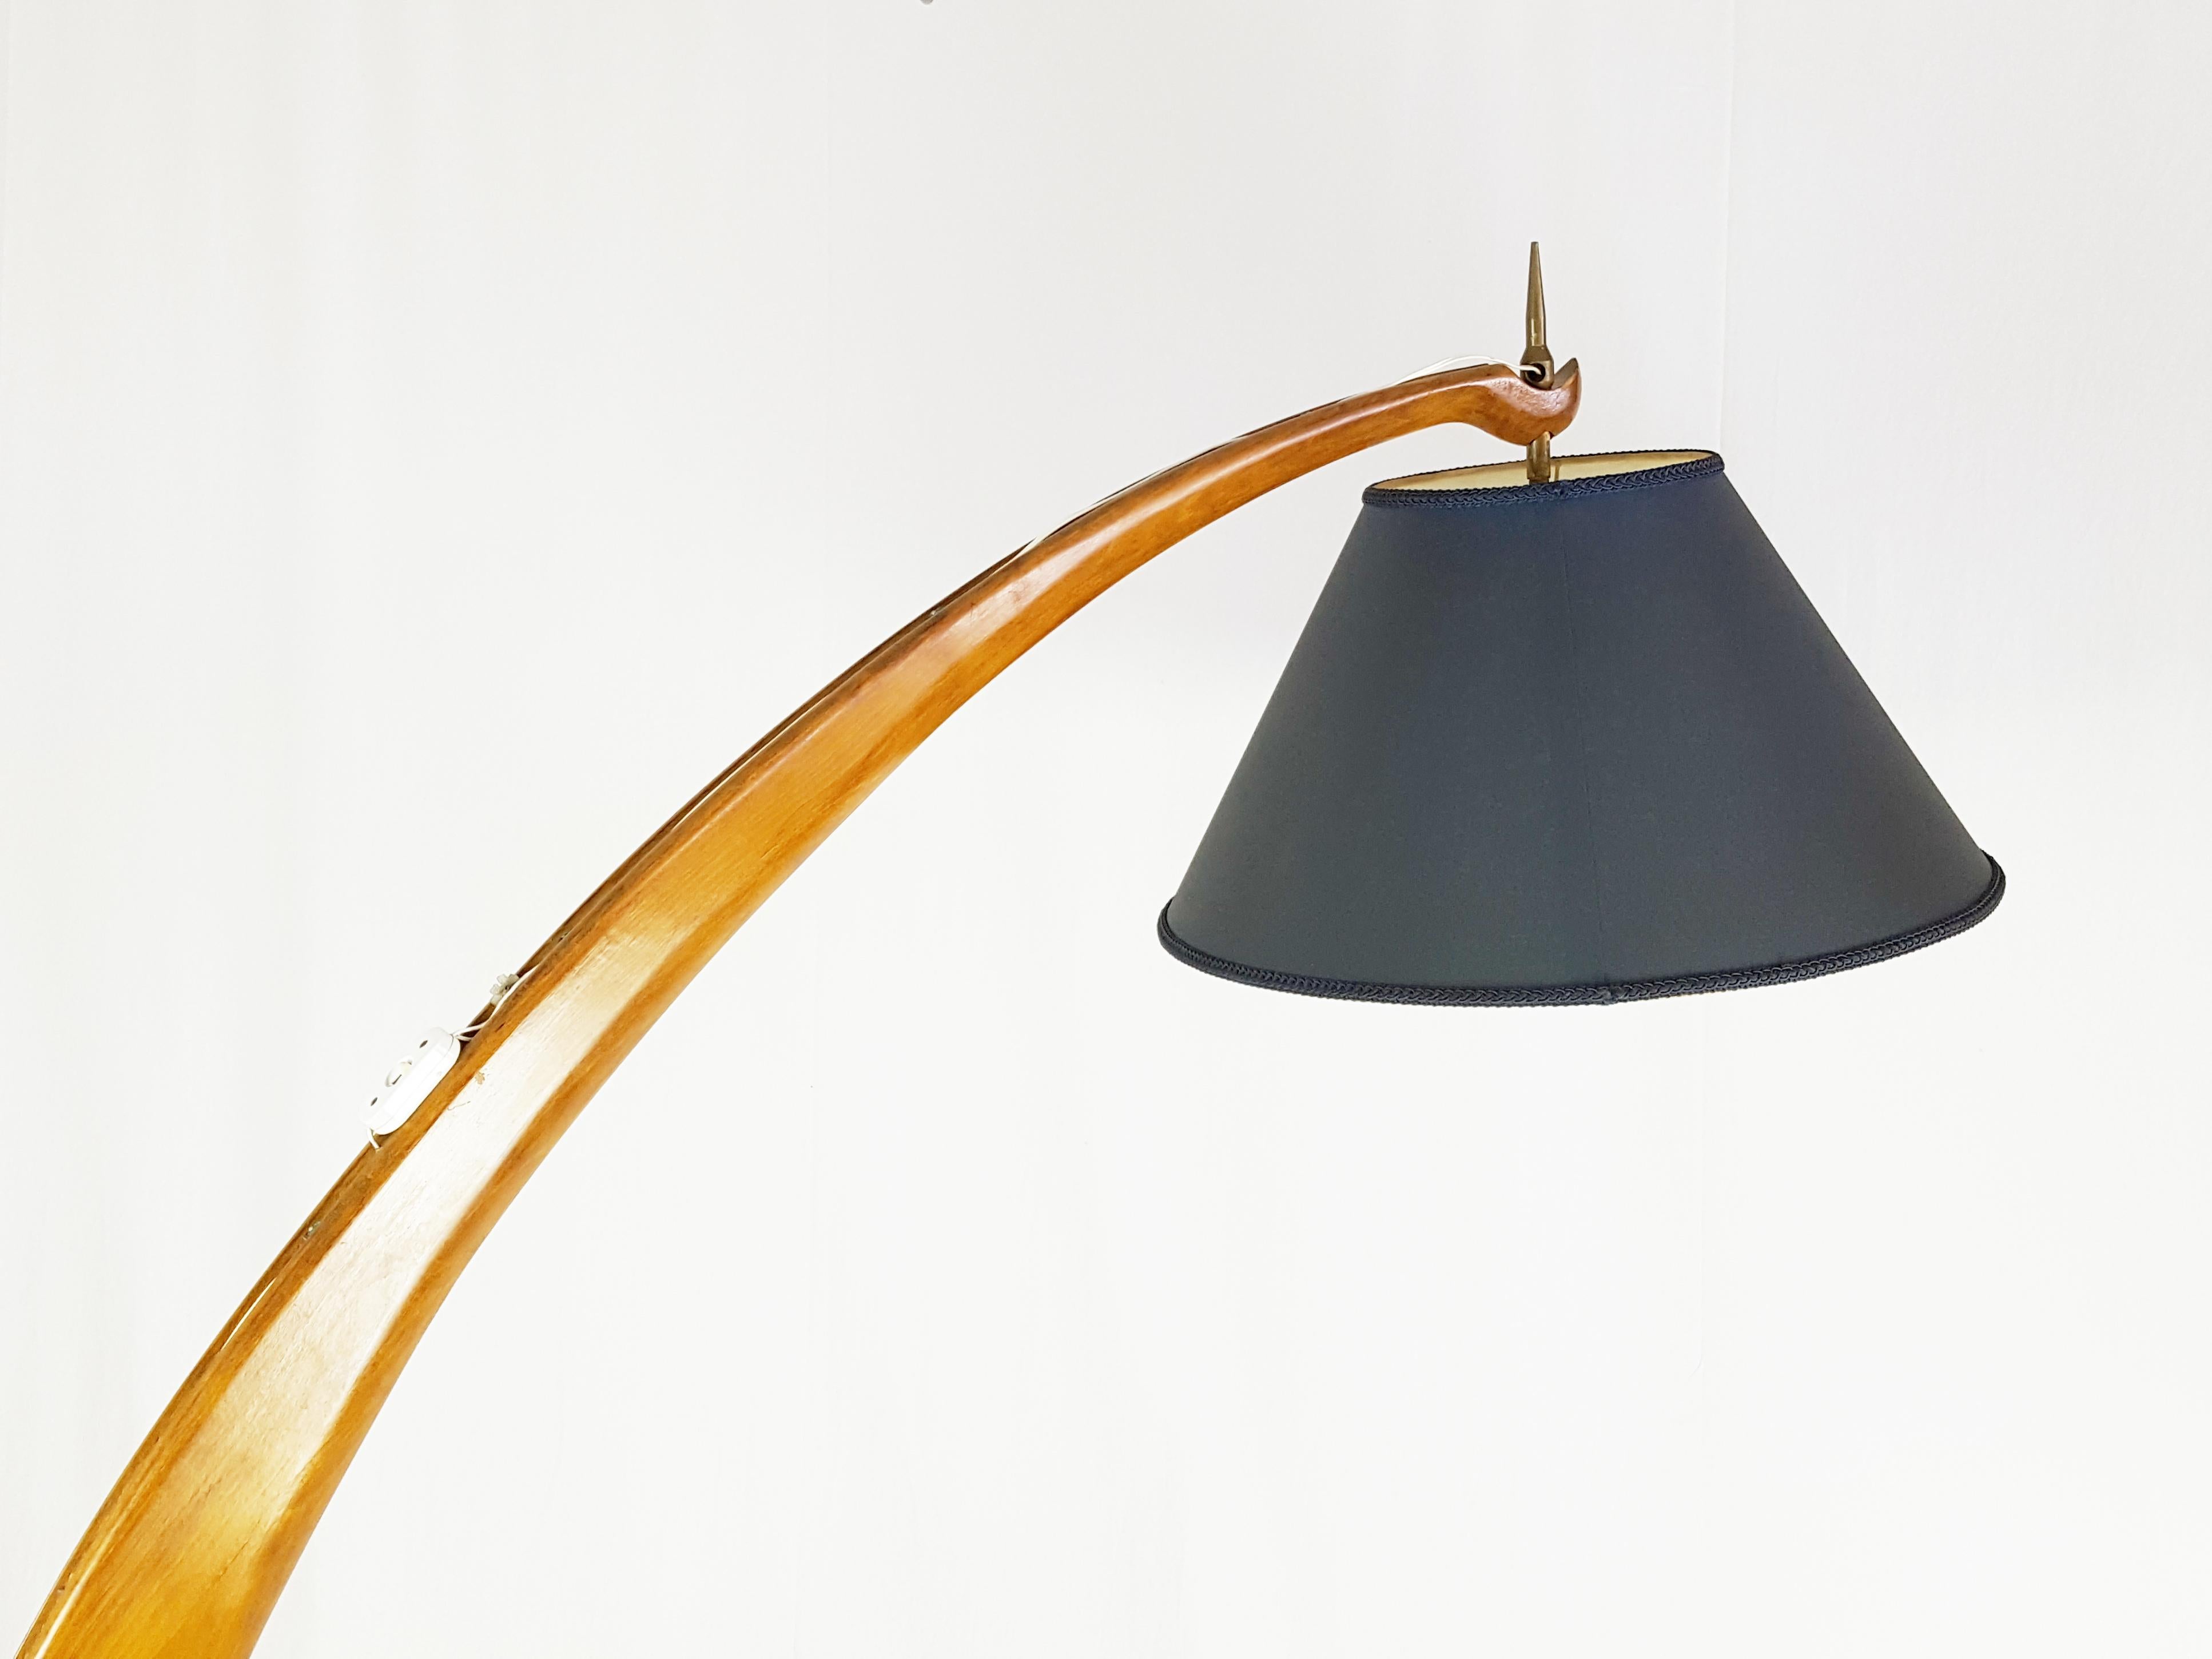 Sculptural wooden structure with brass lamp holder and blue navy fabric shade. This floor lamp was designed and produced in Italy around 1950s. It remains in very good vintage condition: few wood defects on the base as showed in pictures. The fabric